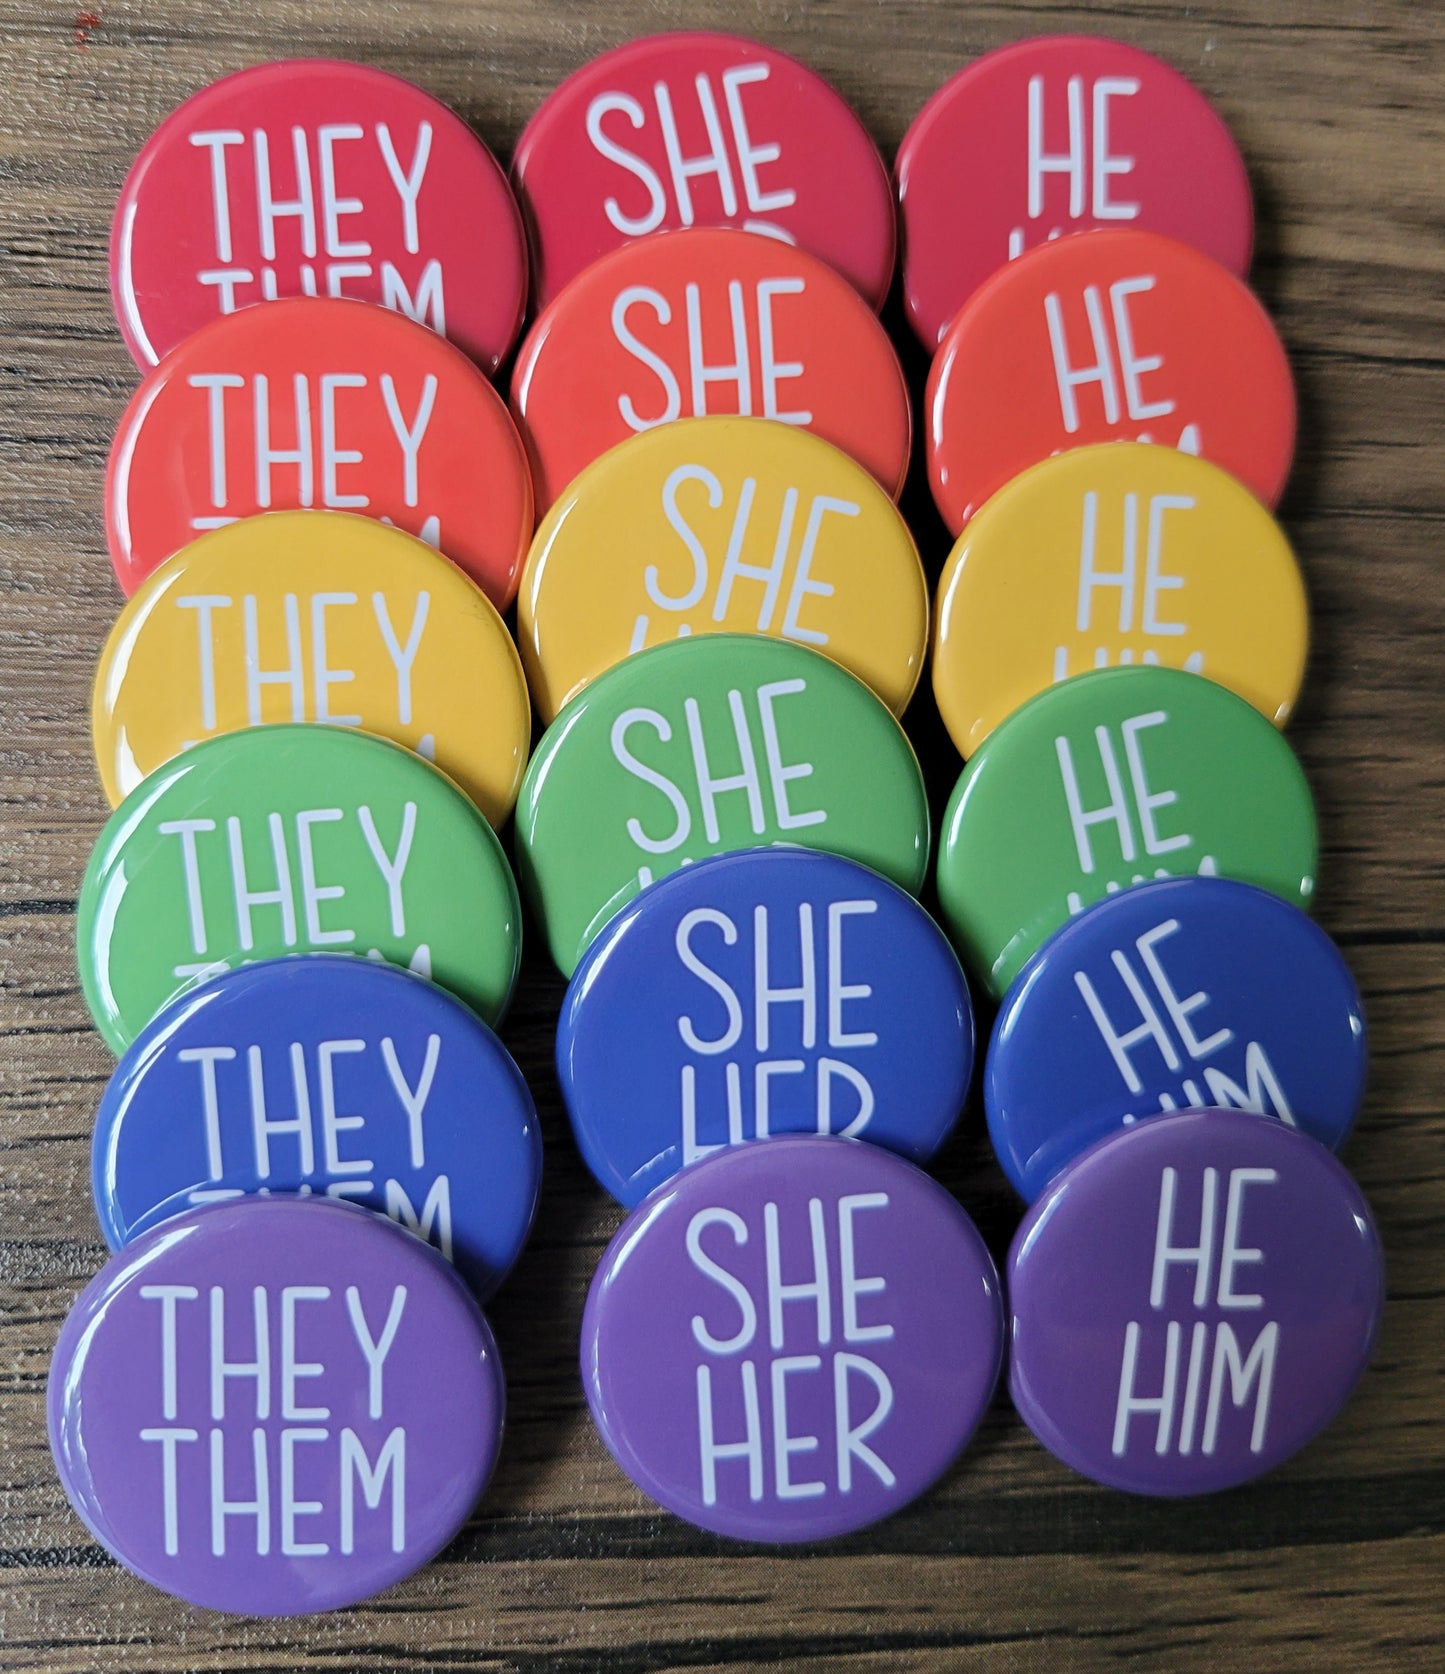 Pronoun Pins - He/Him, She/Her, They/Them, She/They, He/They